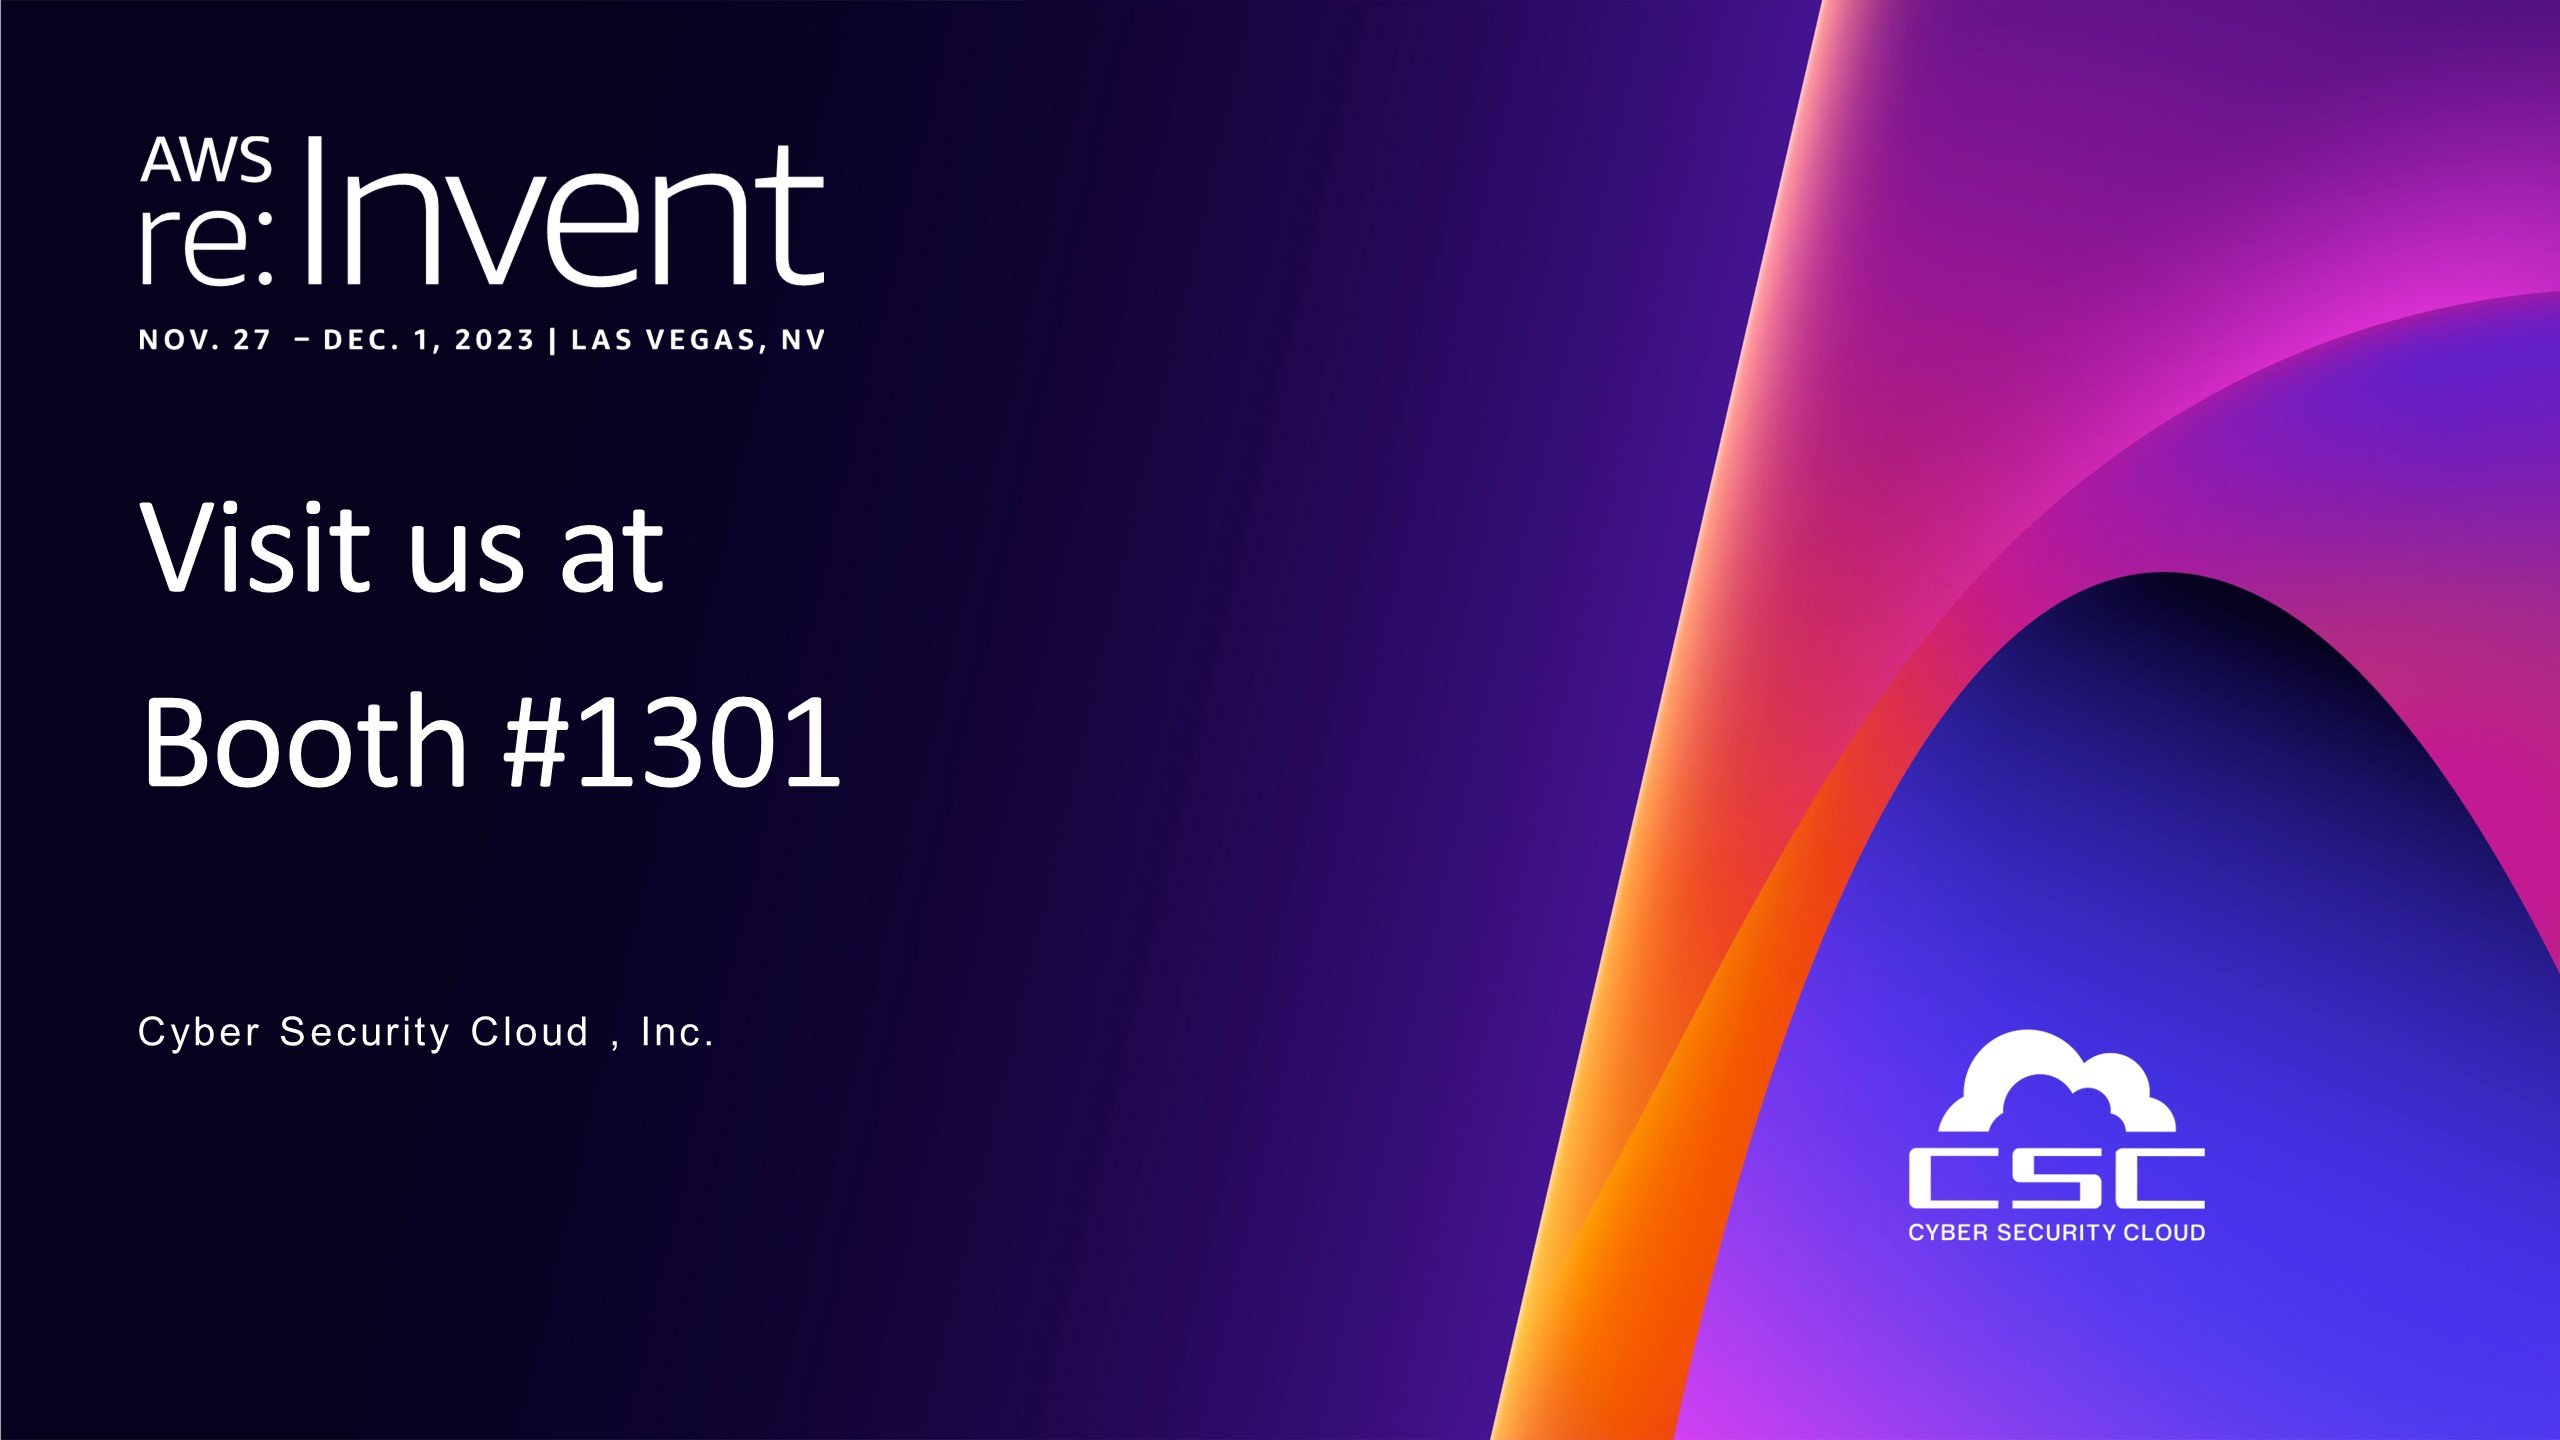 Amazon Web Services, Inc. Exhibits at "AWS re:Invent 2023"